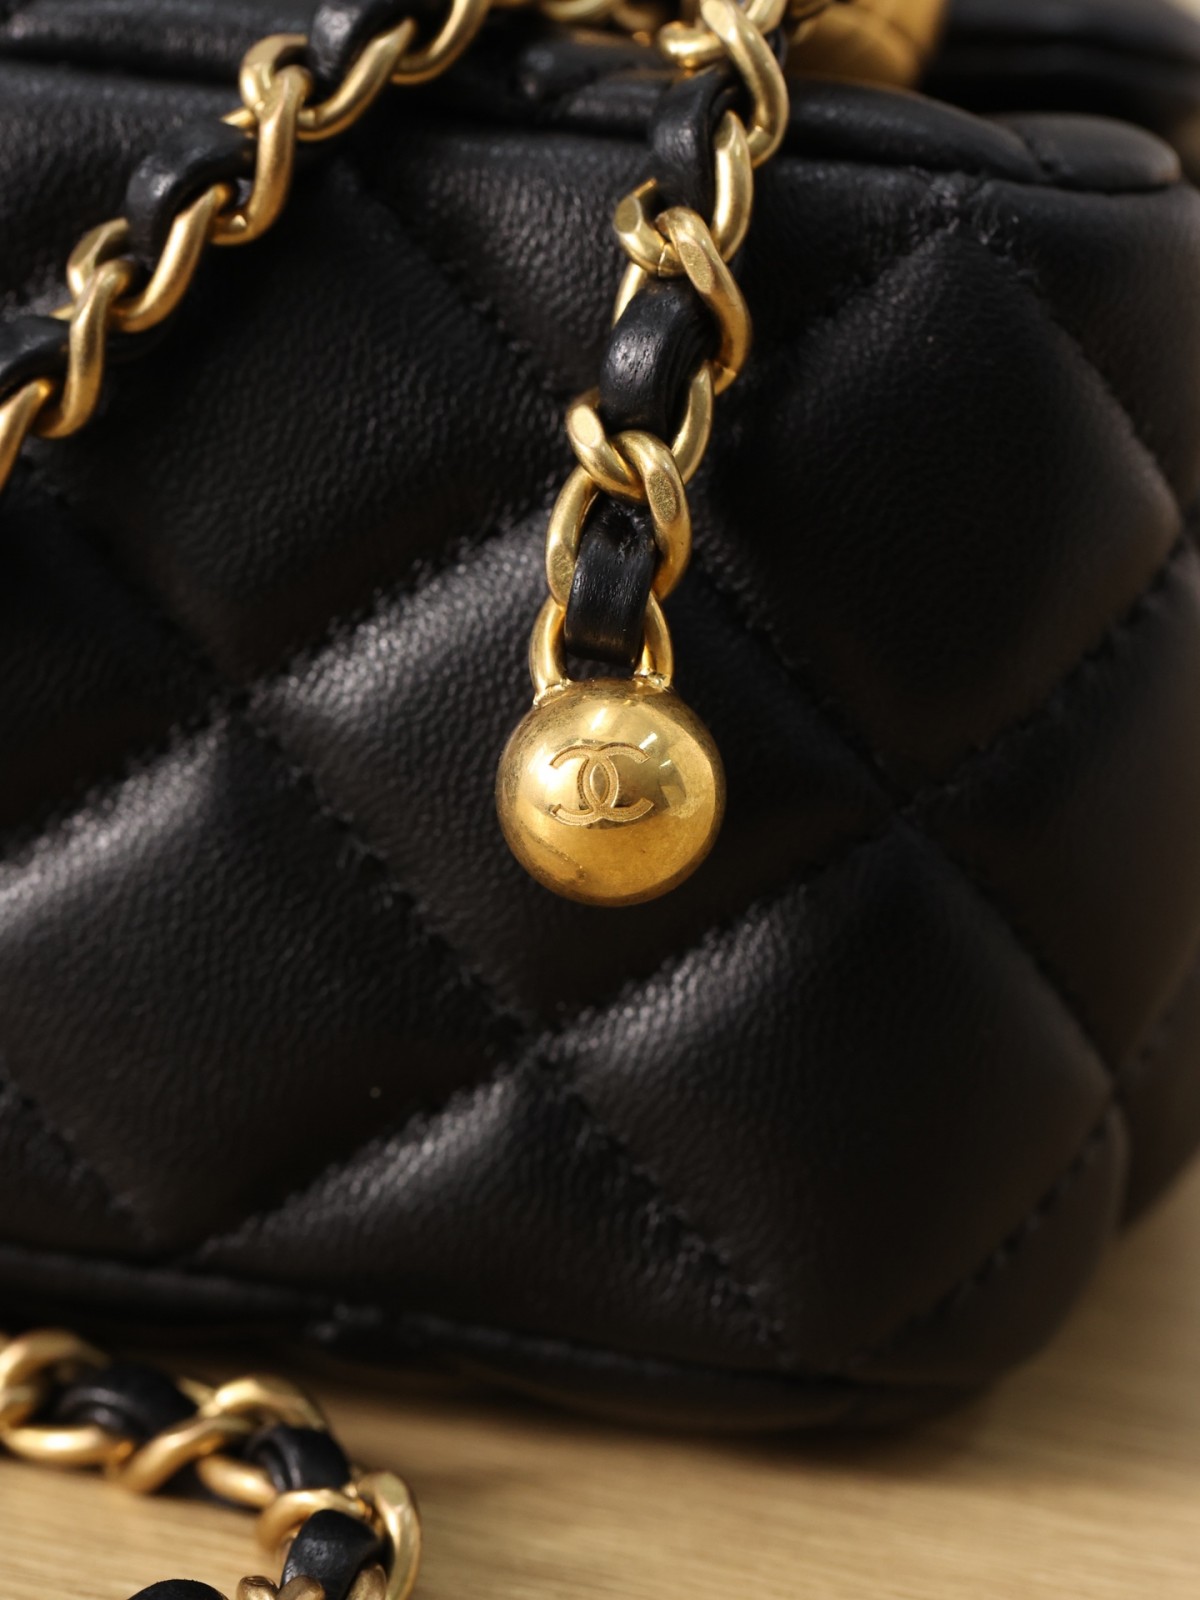 Shebag is serious to the Mini Classic flap bag with gold ball this time！（2024 Week 3）-Best Quality Fake Louis Vuitton Bag Online Store, Replica designer bag ru